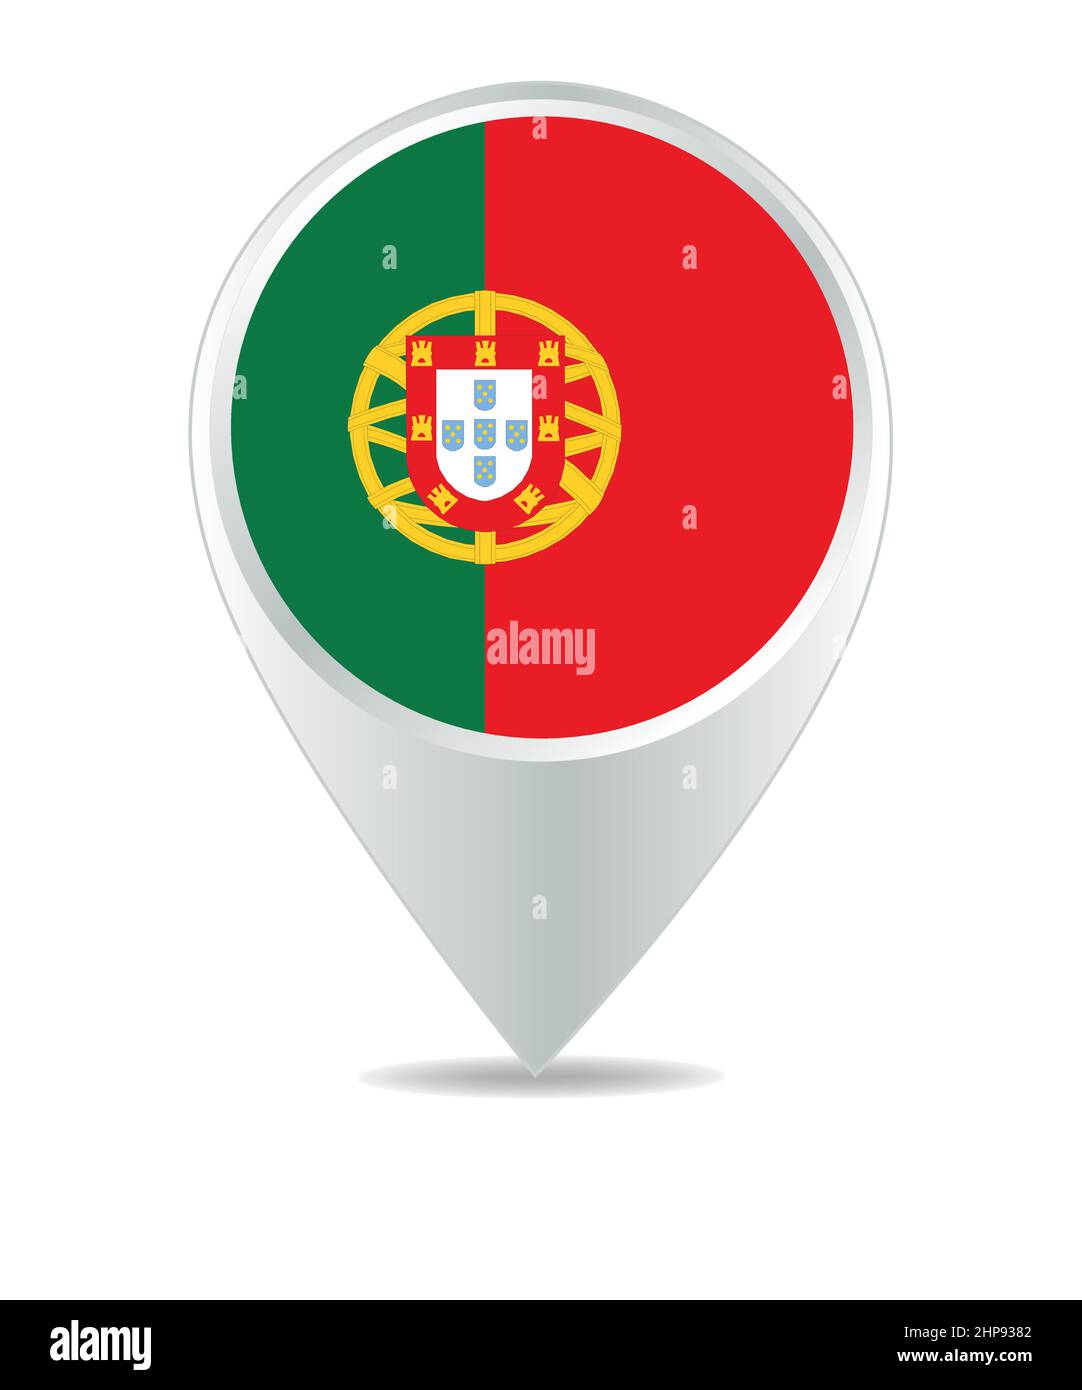 Location Icon for Portugal Stock Vector